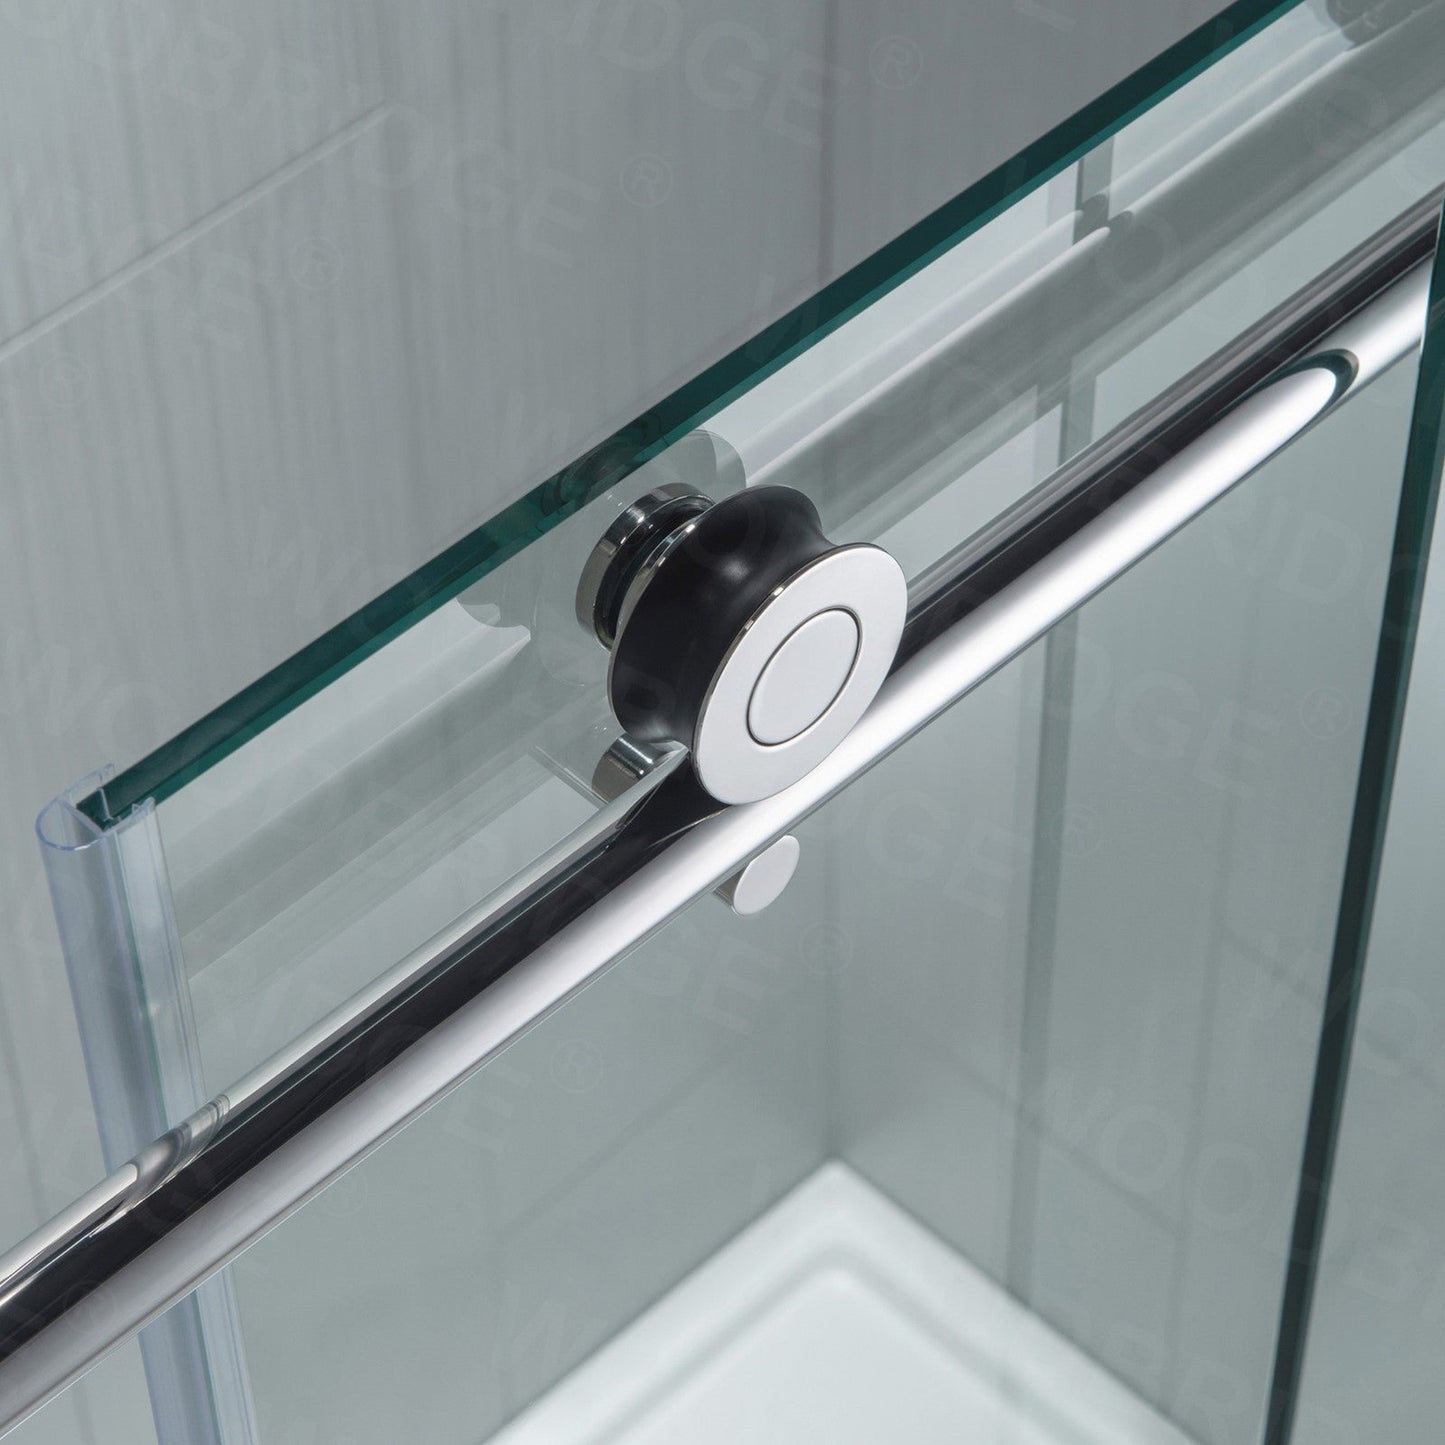 WoodBridge 72" W x 76" H Clear Tempered Glass Frameless Shower Door With Polished Chrome Hardware Finish